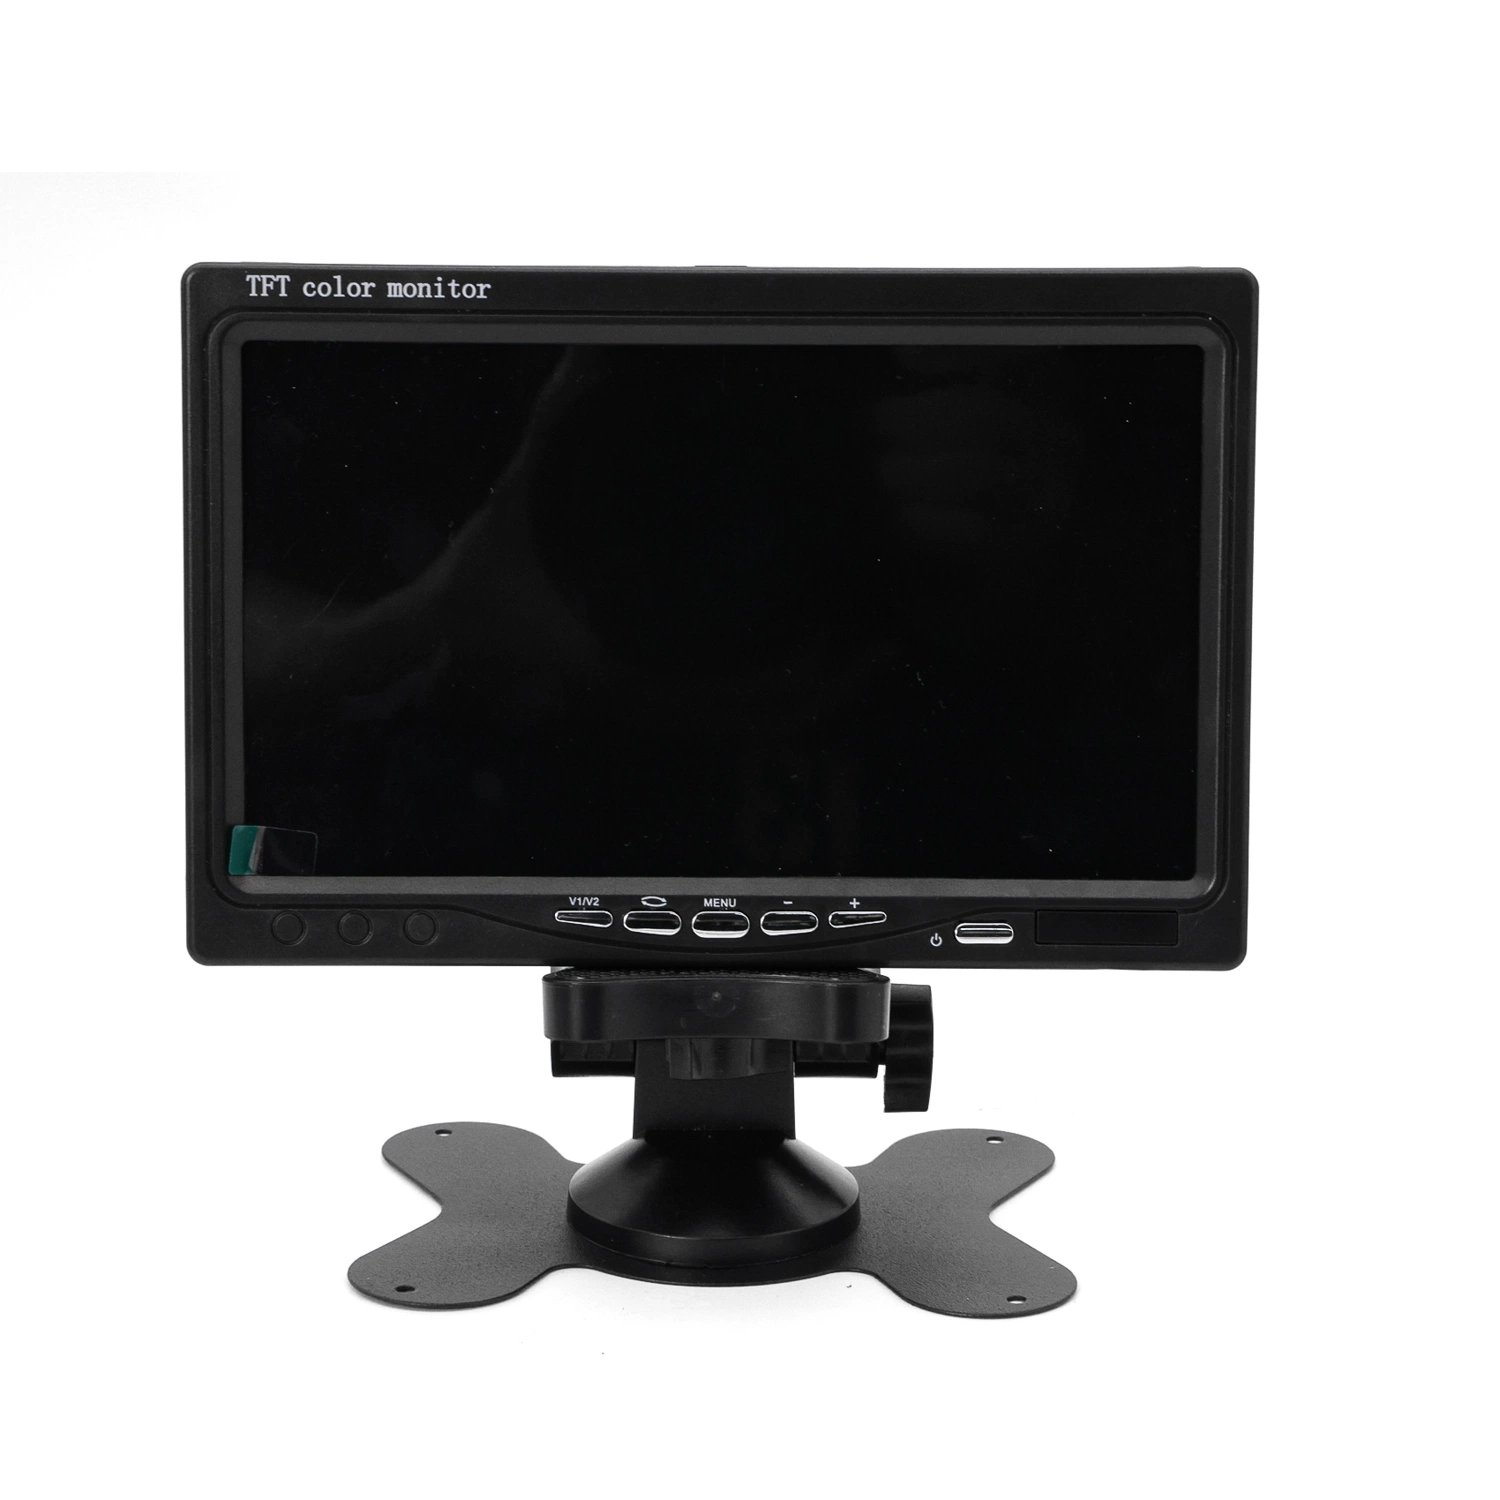 FL-7 Inch TFT LCD Color Monitor 2 Video Input Car Rear View Monitor DVD VCR Monitor